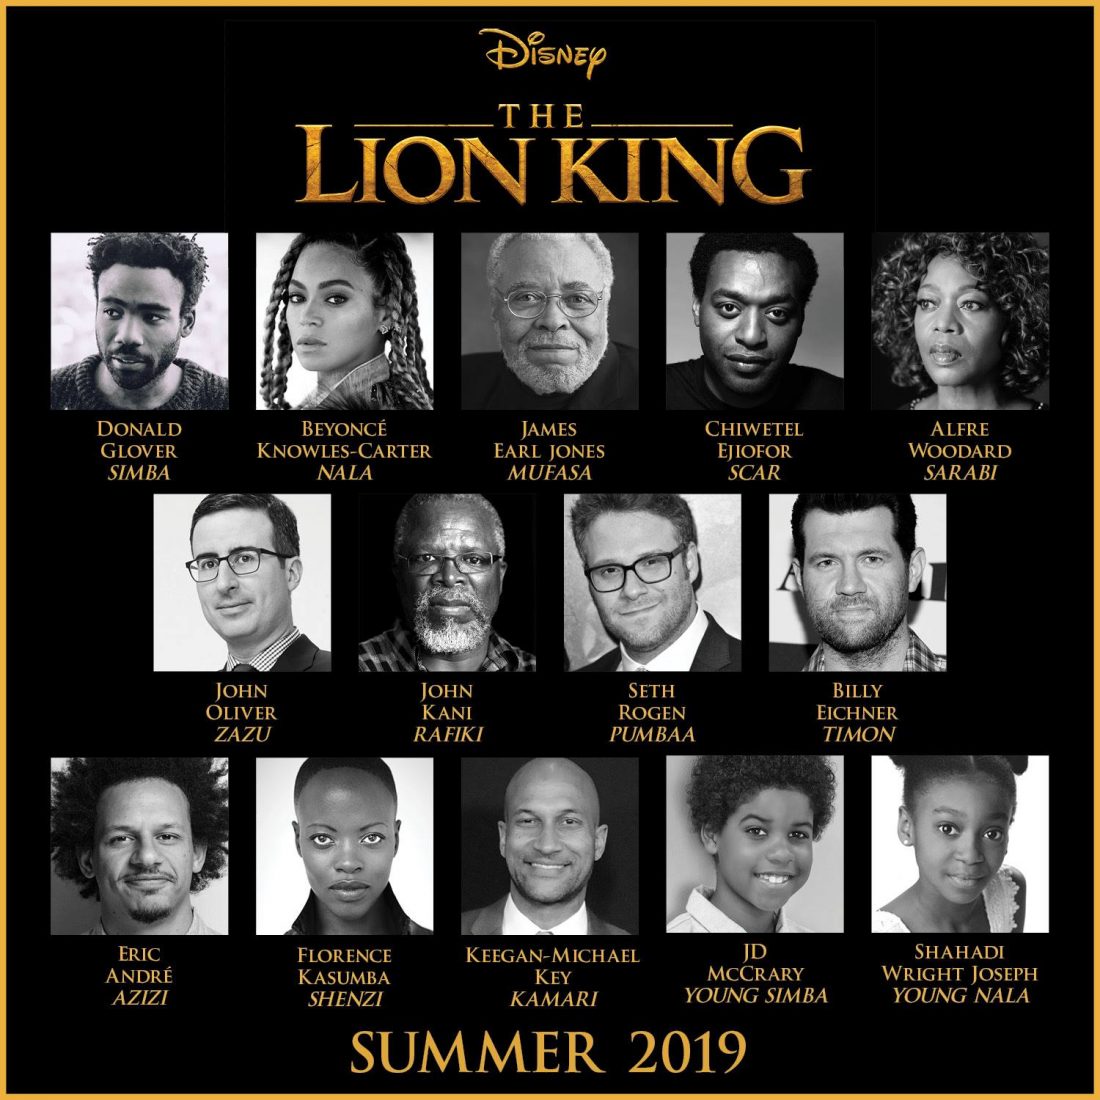 Beyoncé and Donald Glover confirmed to star in Disney’s Lion King!